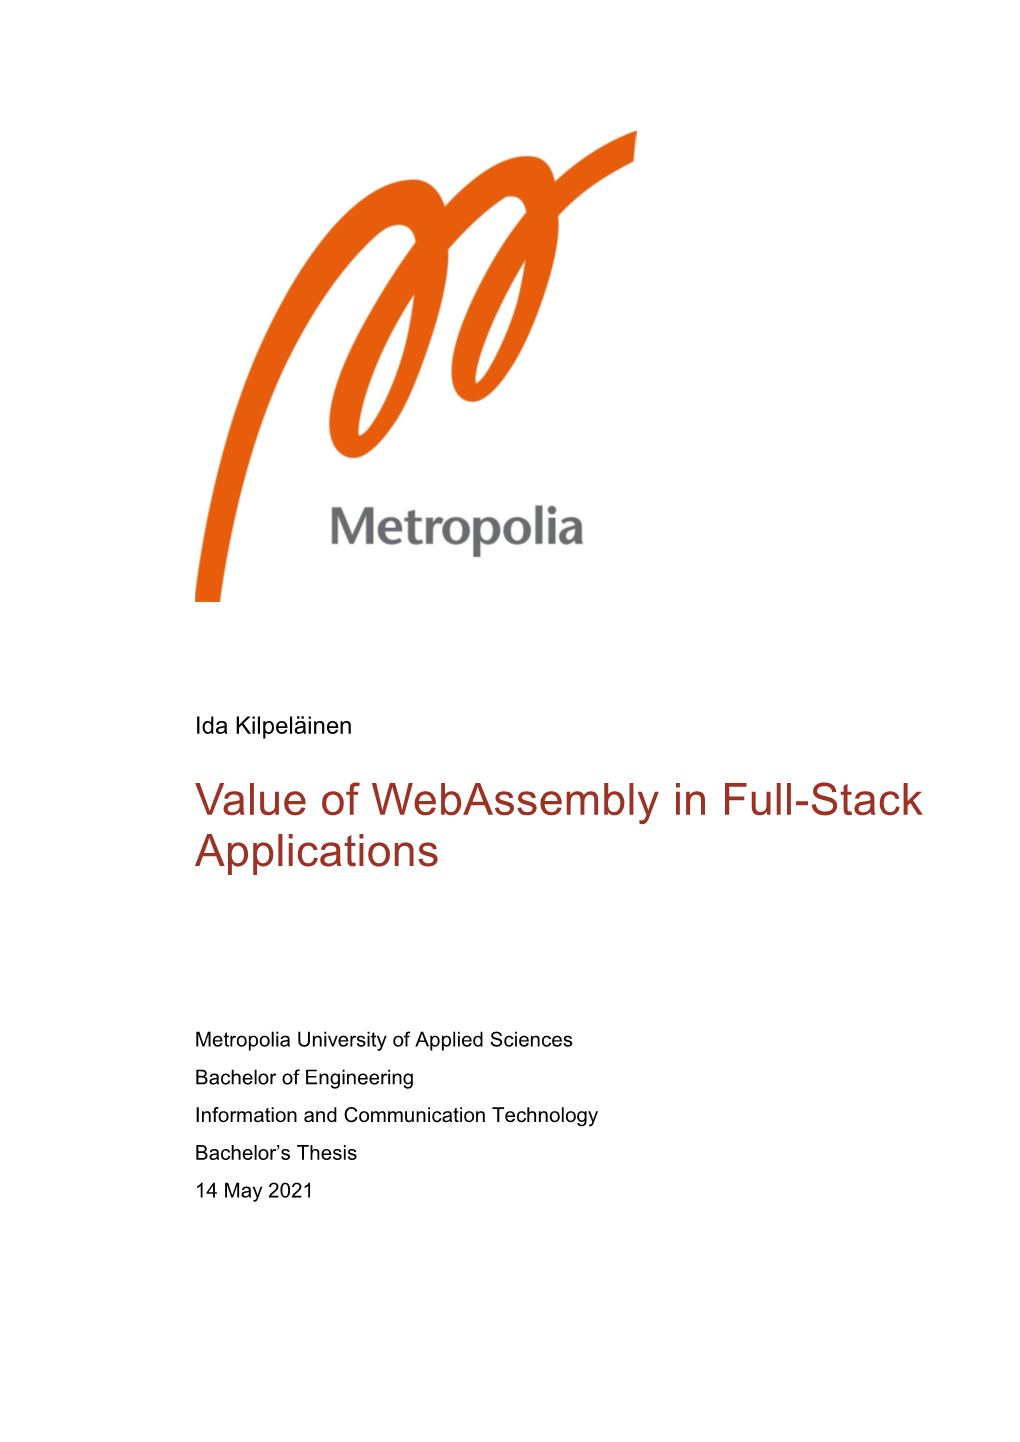 Value of Webassembly in Full-Stack Applications